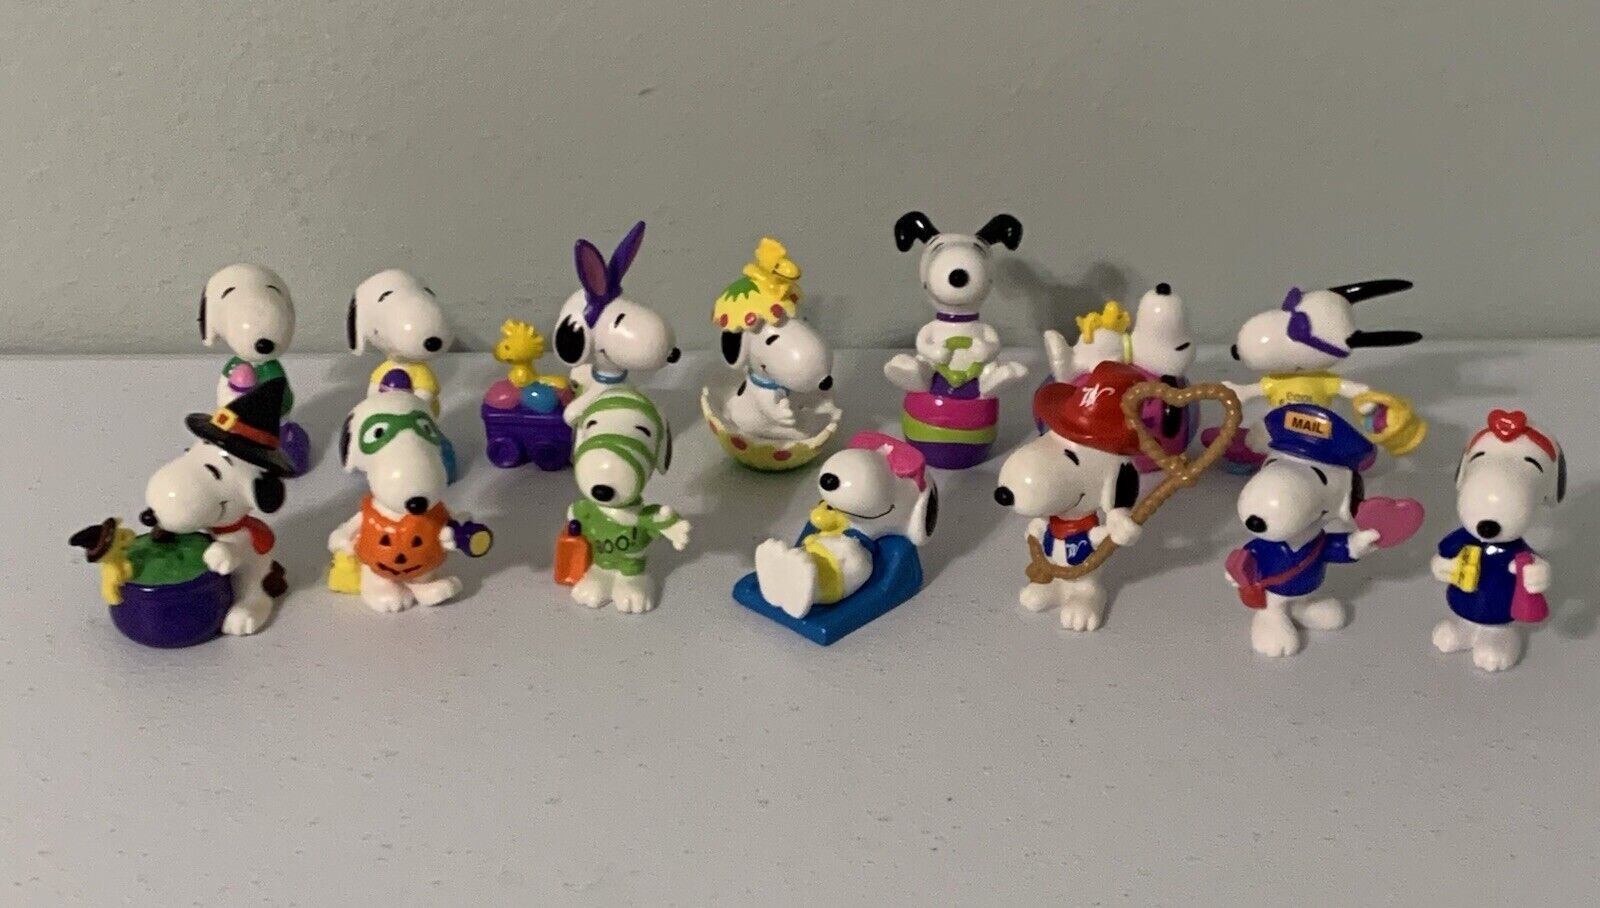 Peanuts Snoopy Mini Figure Toy Lot of 14 Valentine\'s, Easter, Halloween Holiday